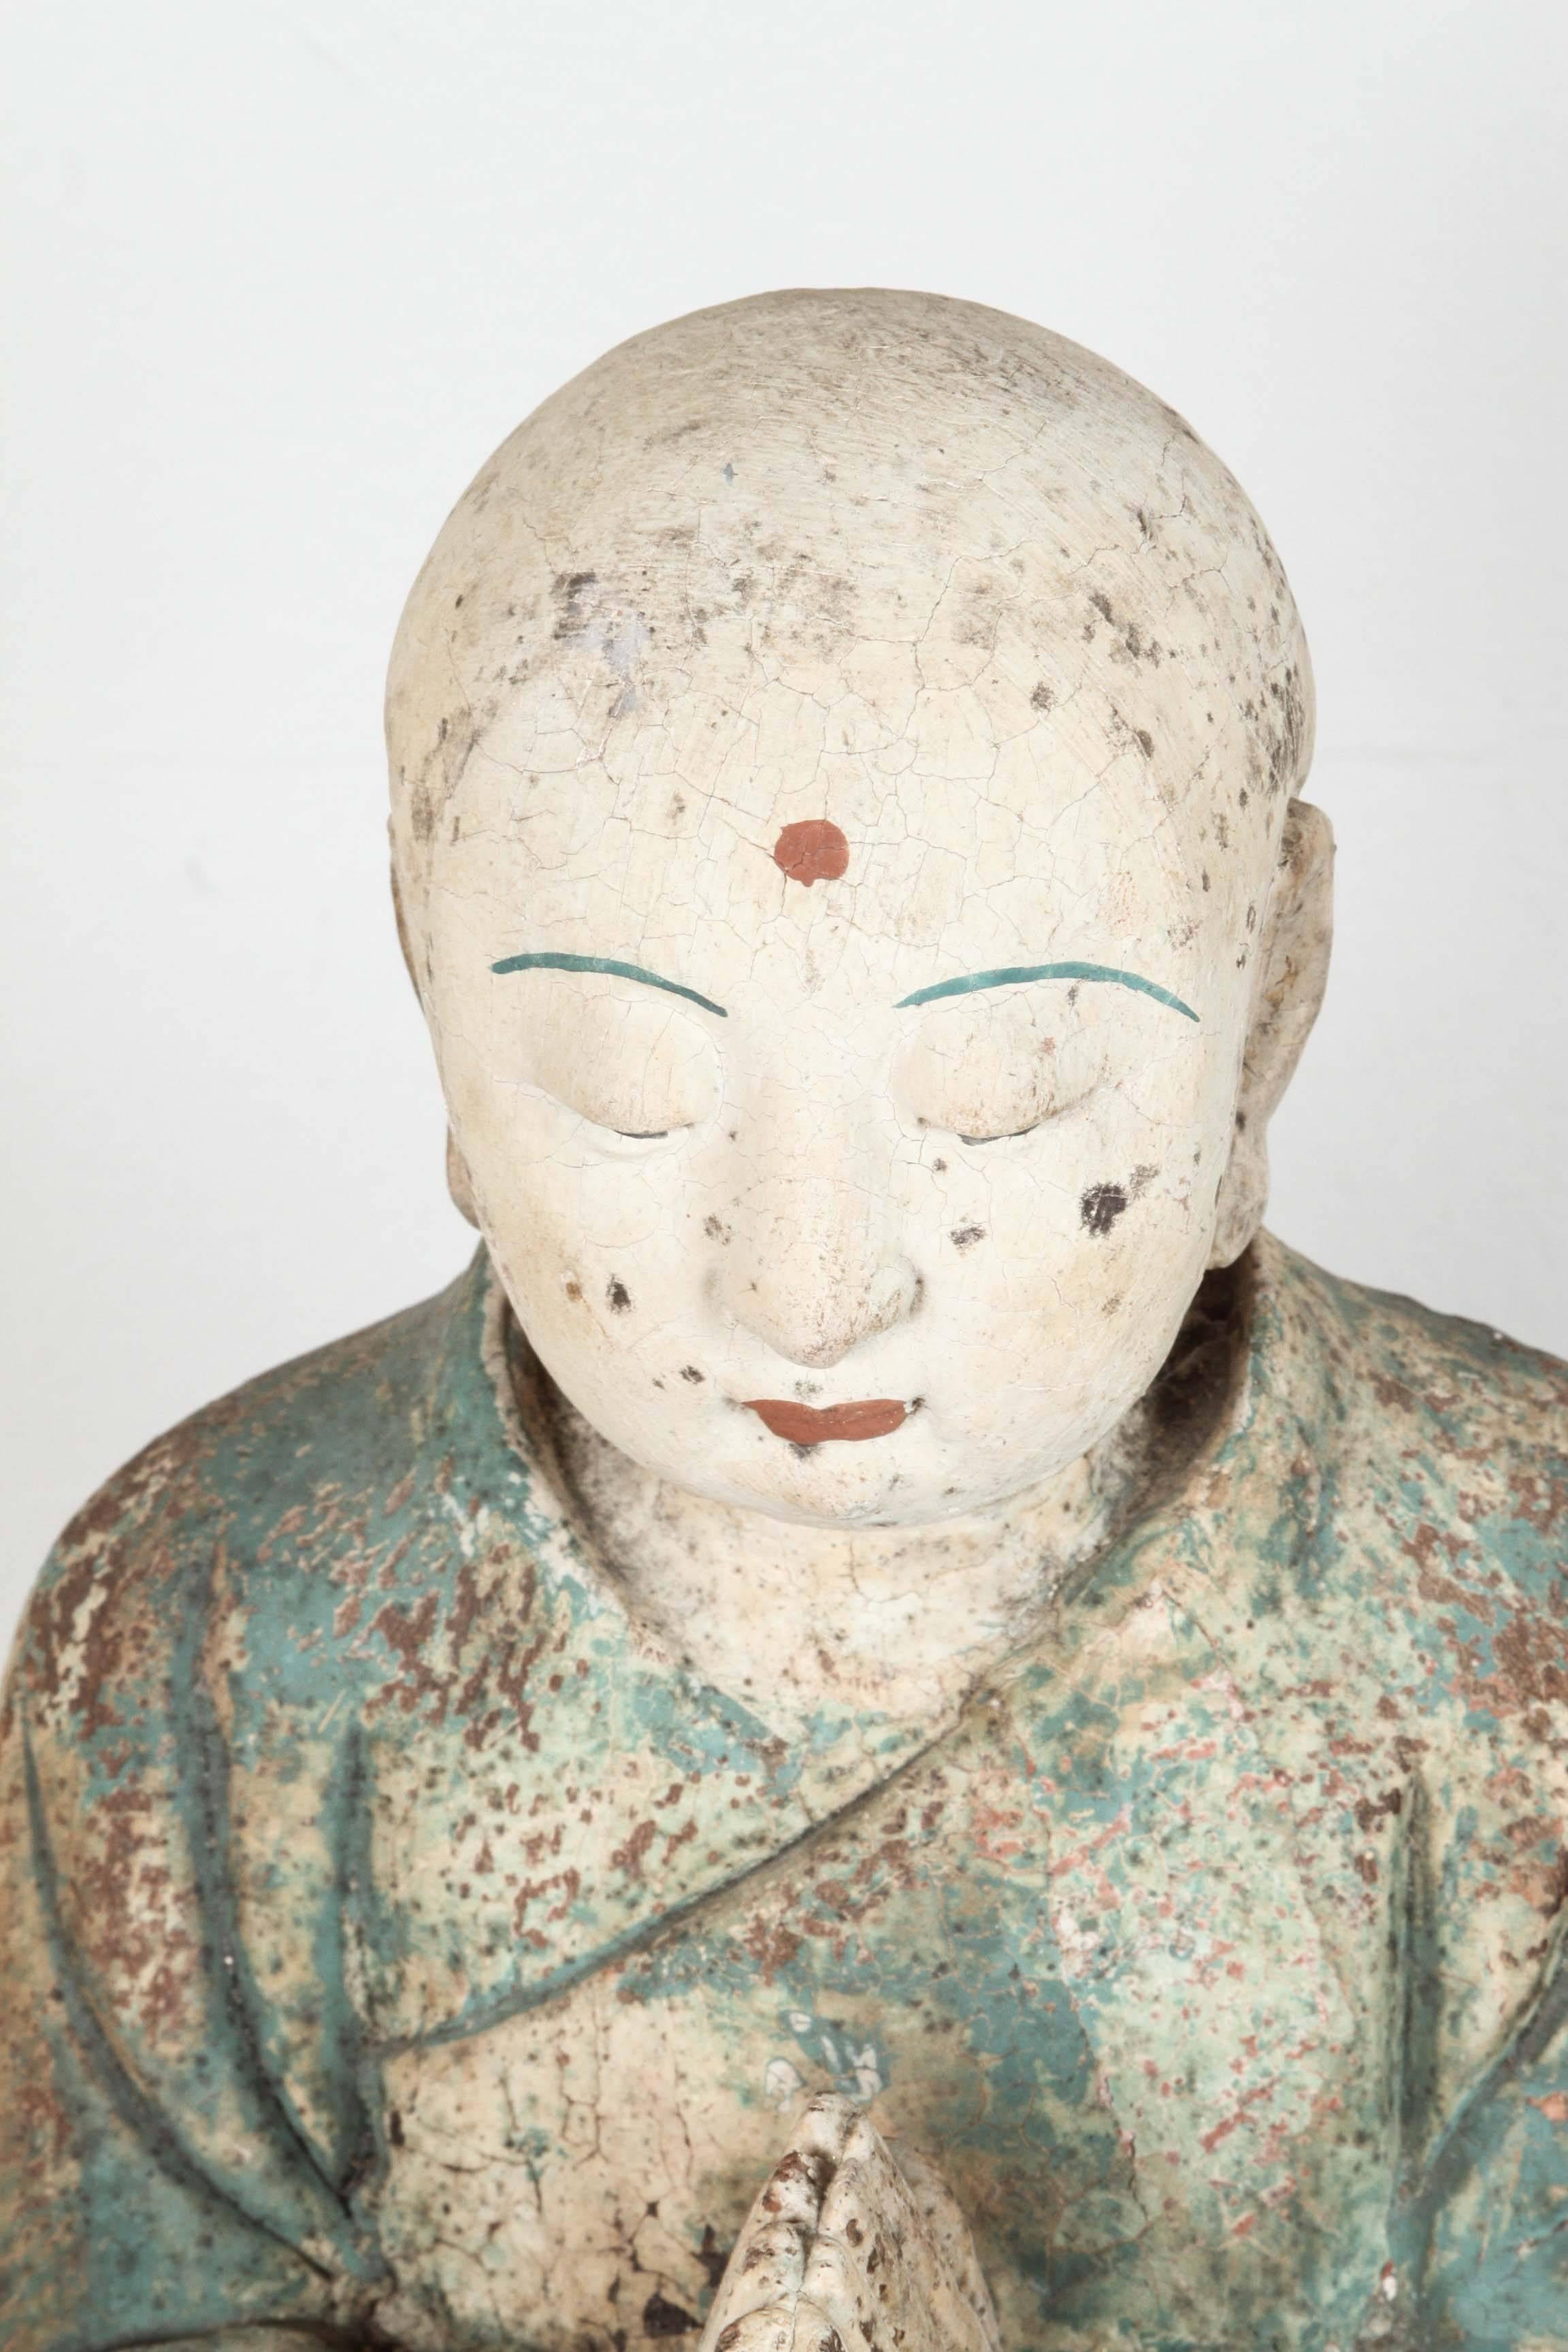 20th century hand-carved wood figure of a praying Lama or a monk. Distressed red, green-blue, ivory, black and white paint.